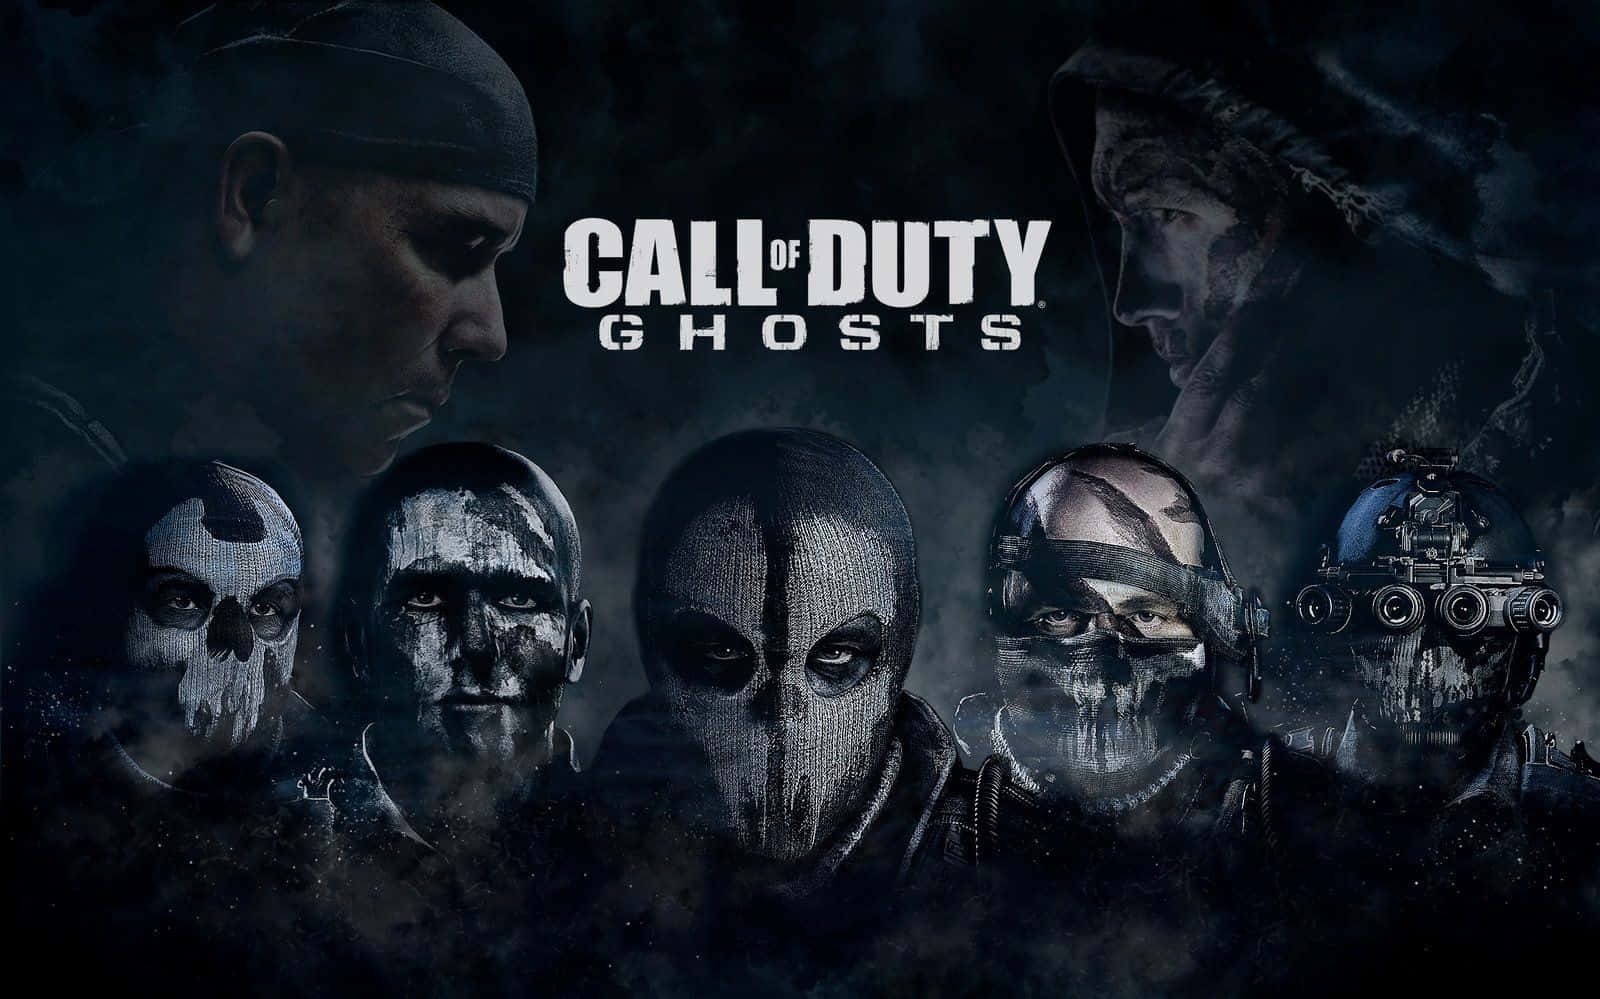 Intense action in Call of Duty: Ghosts Wallpaper